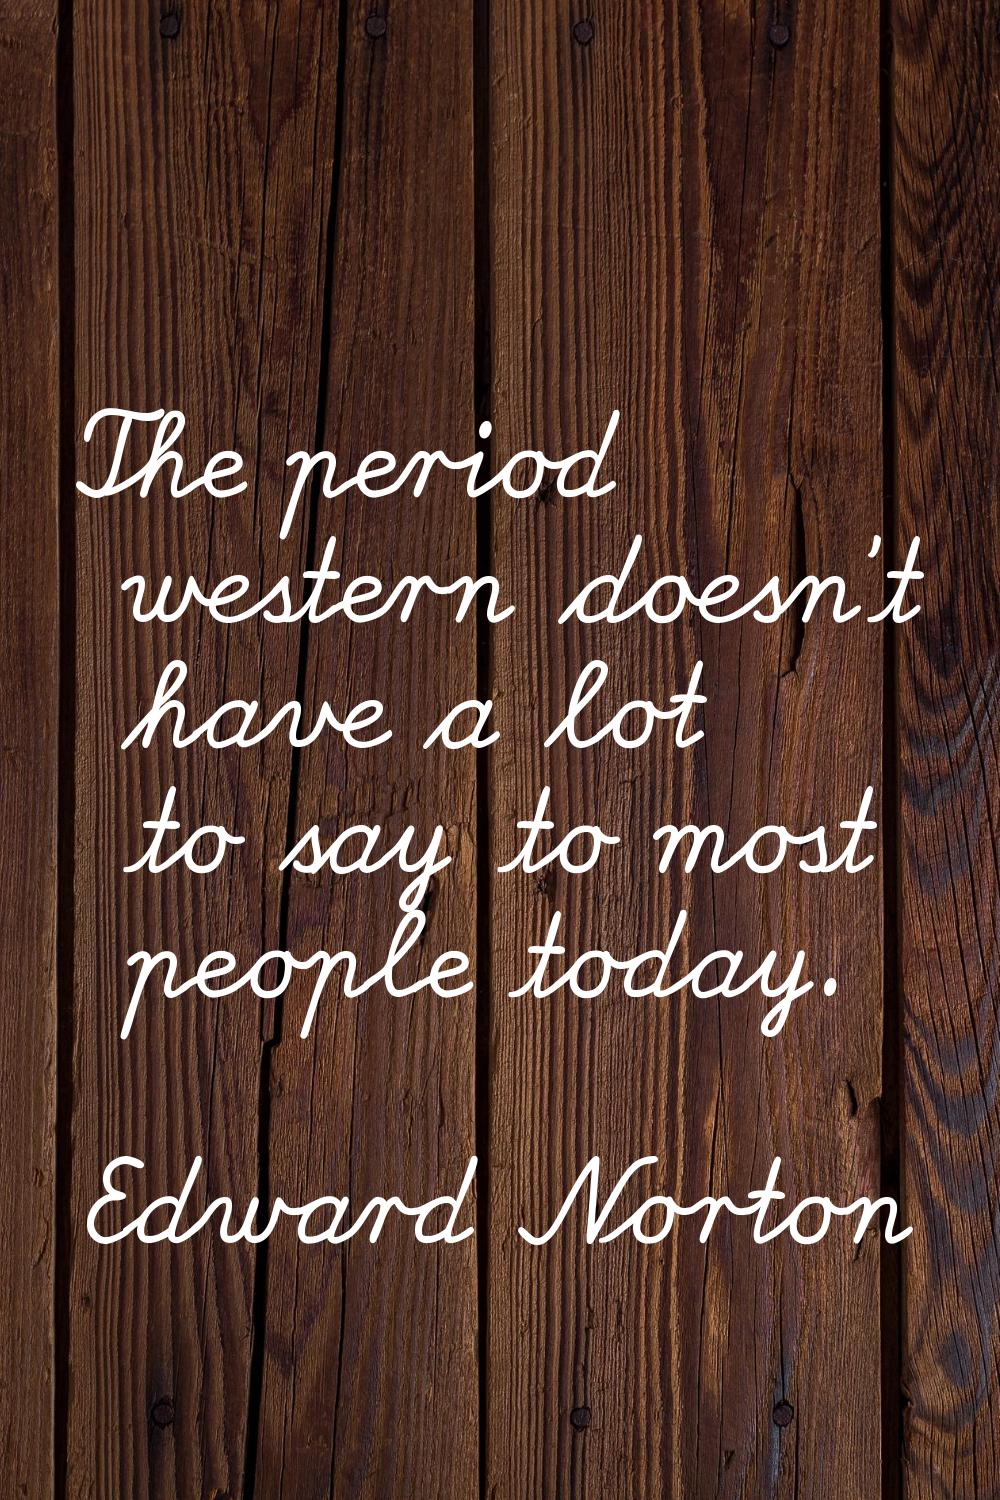 The period western doesn't have a lot to say to most people today.